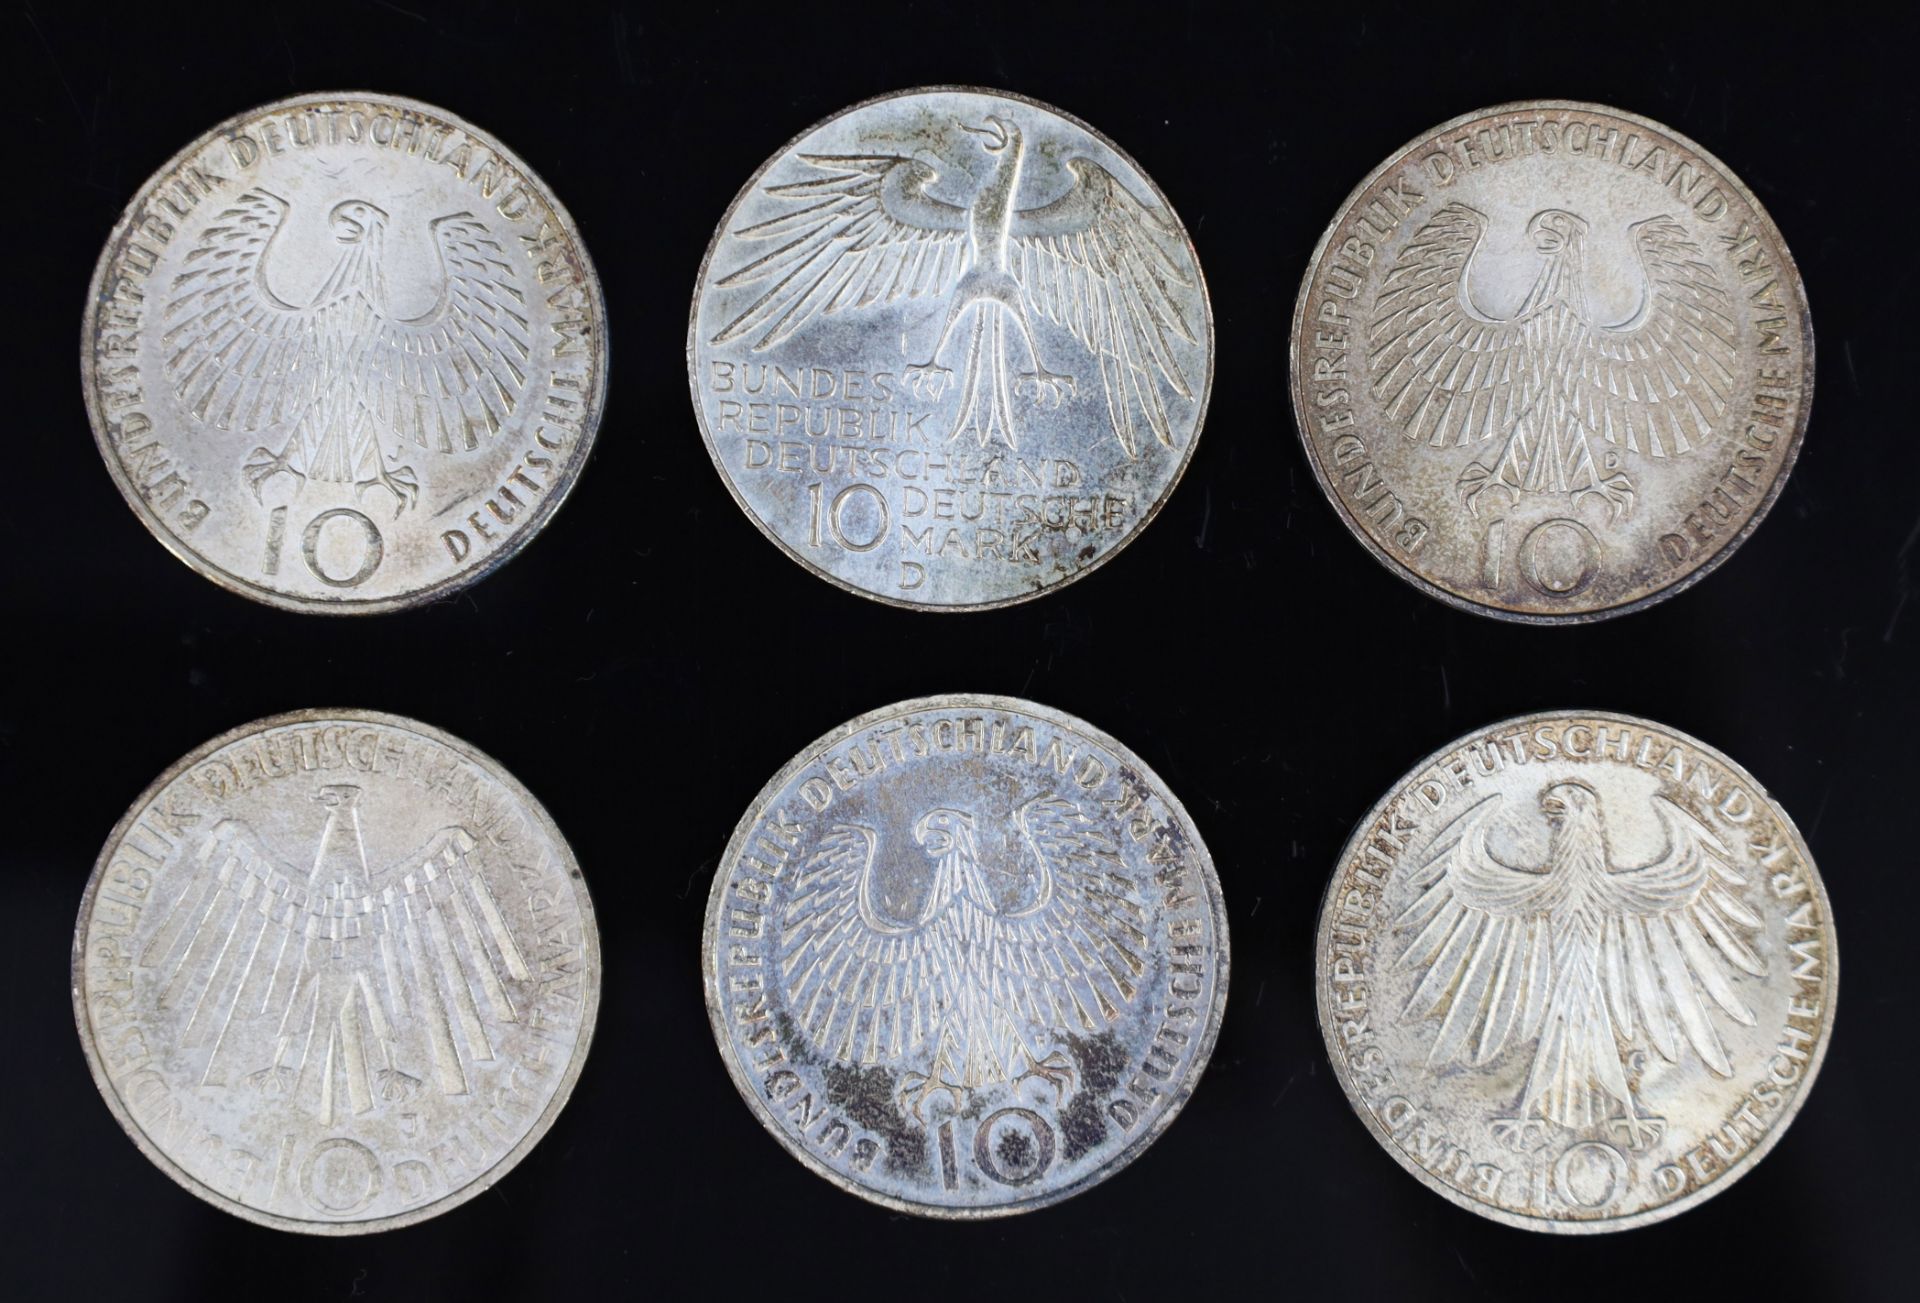 9x ‘10 German Marks’. Munich Olympics. Silver coins. - Image 2 of 7